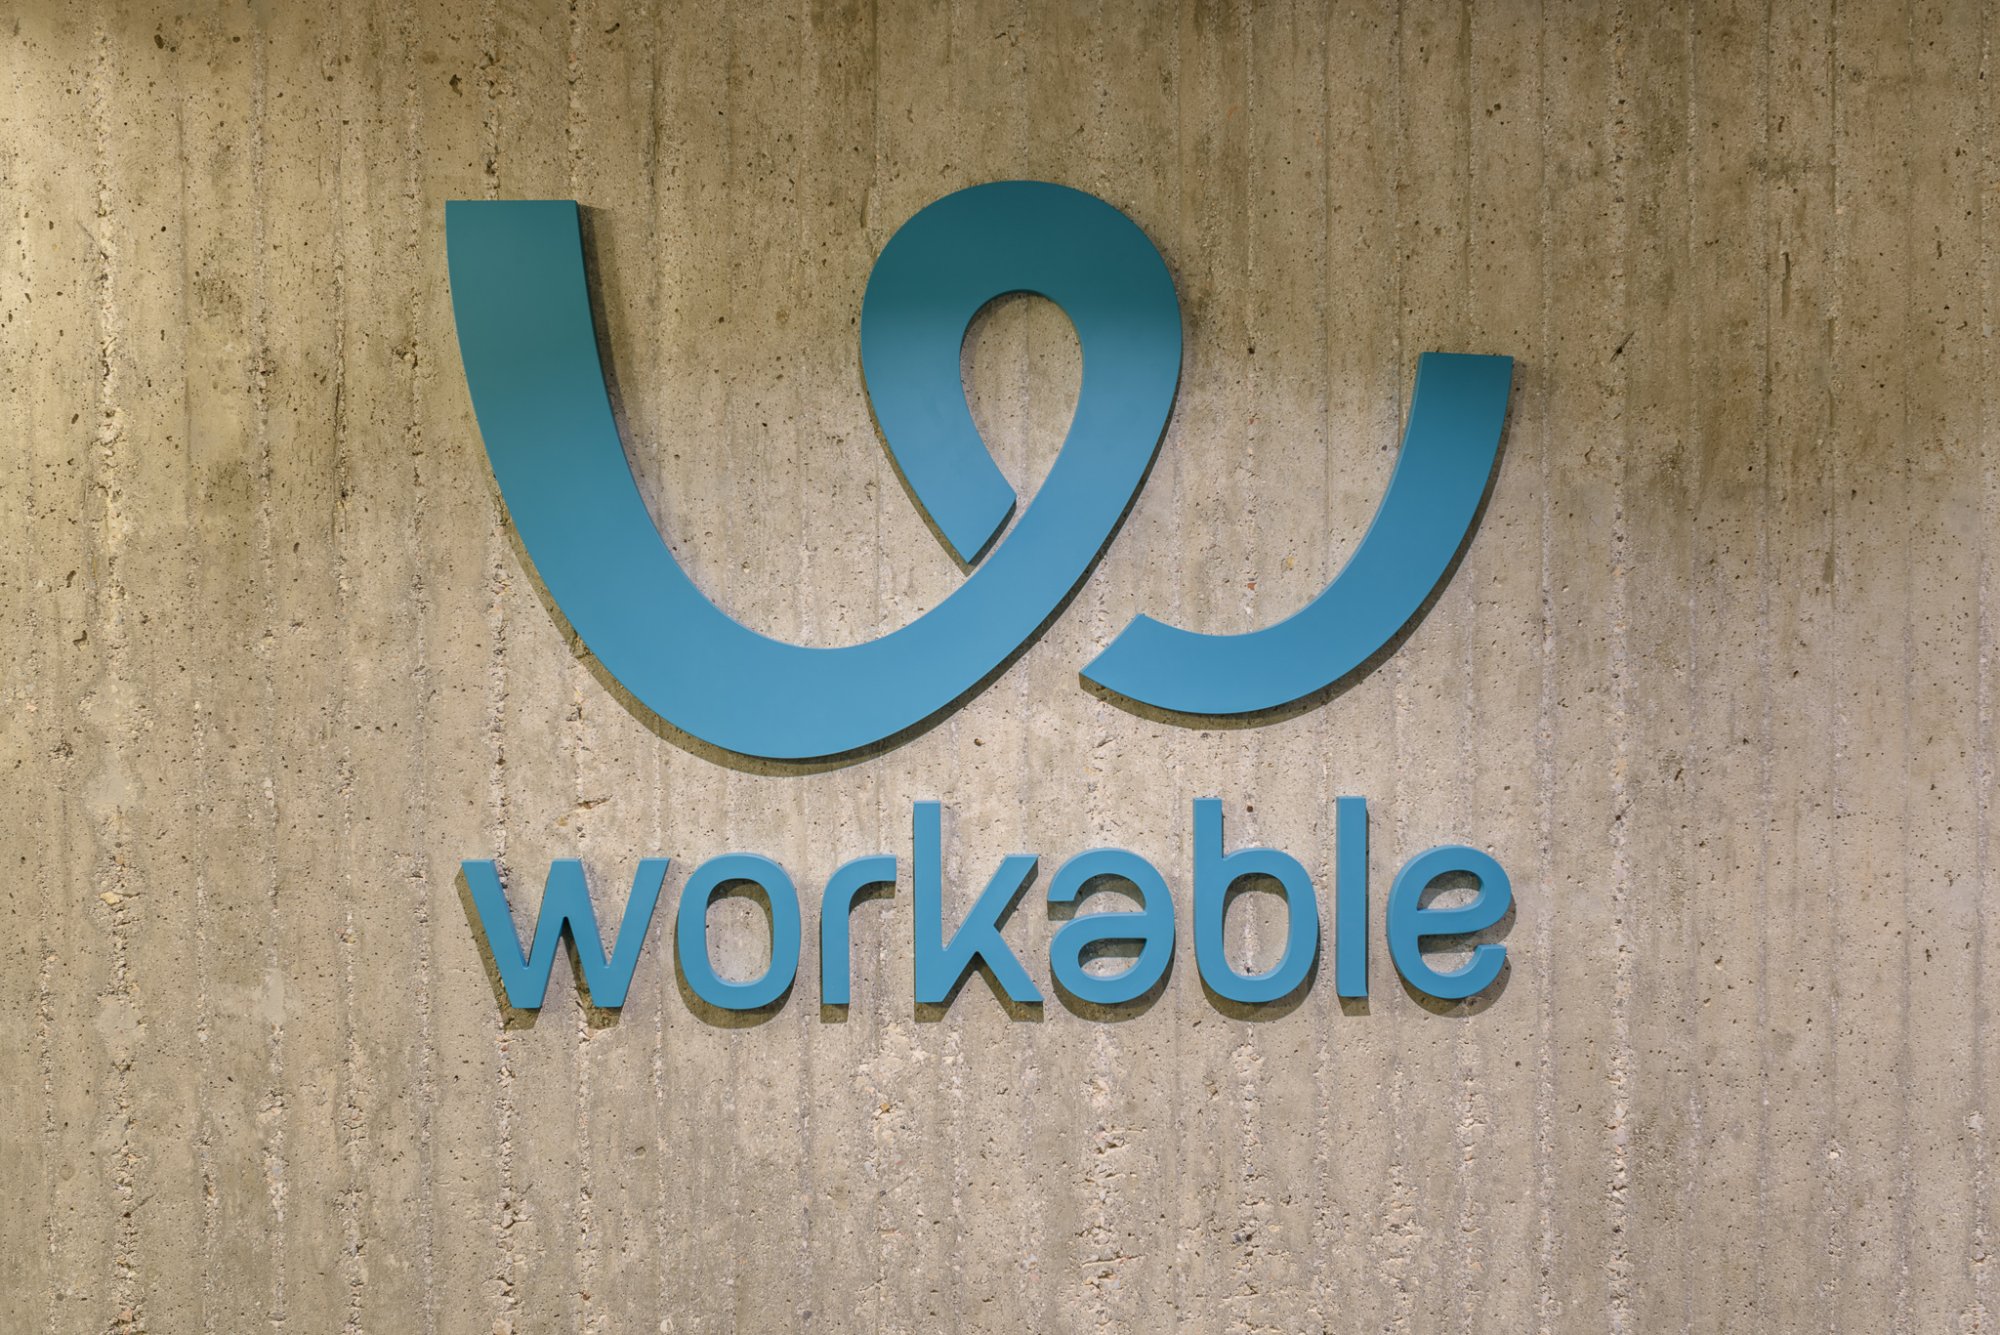 Workable Culture